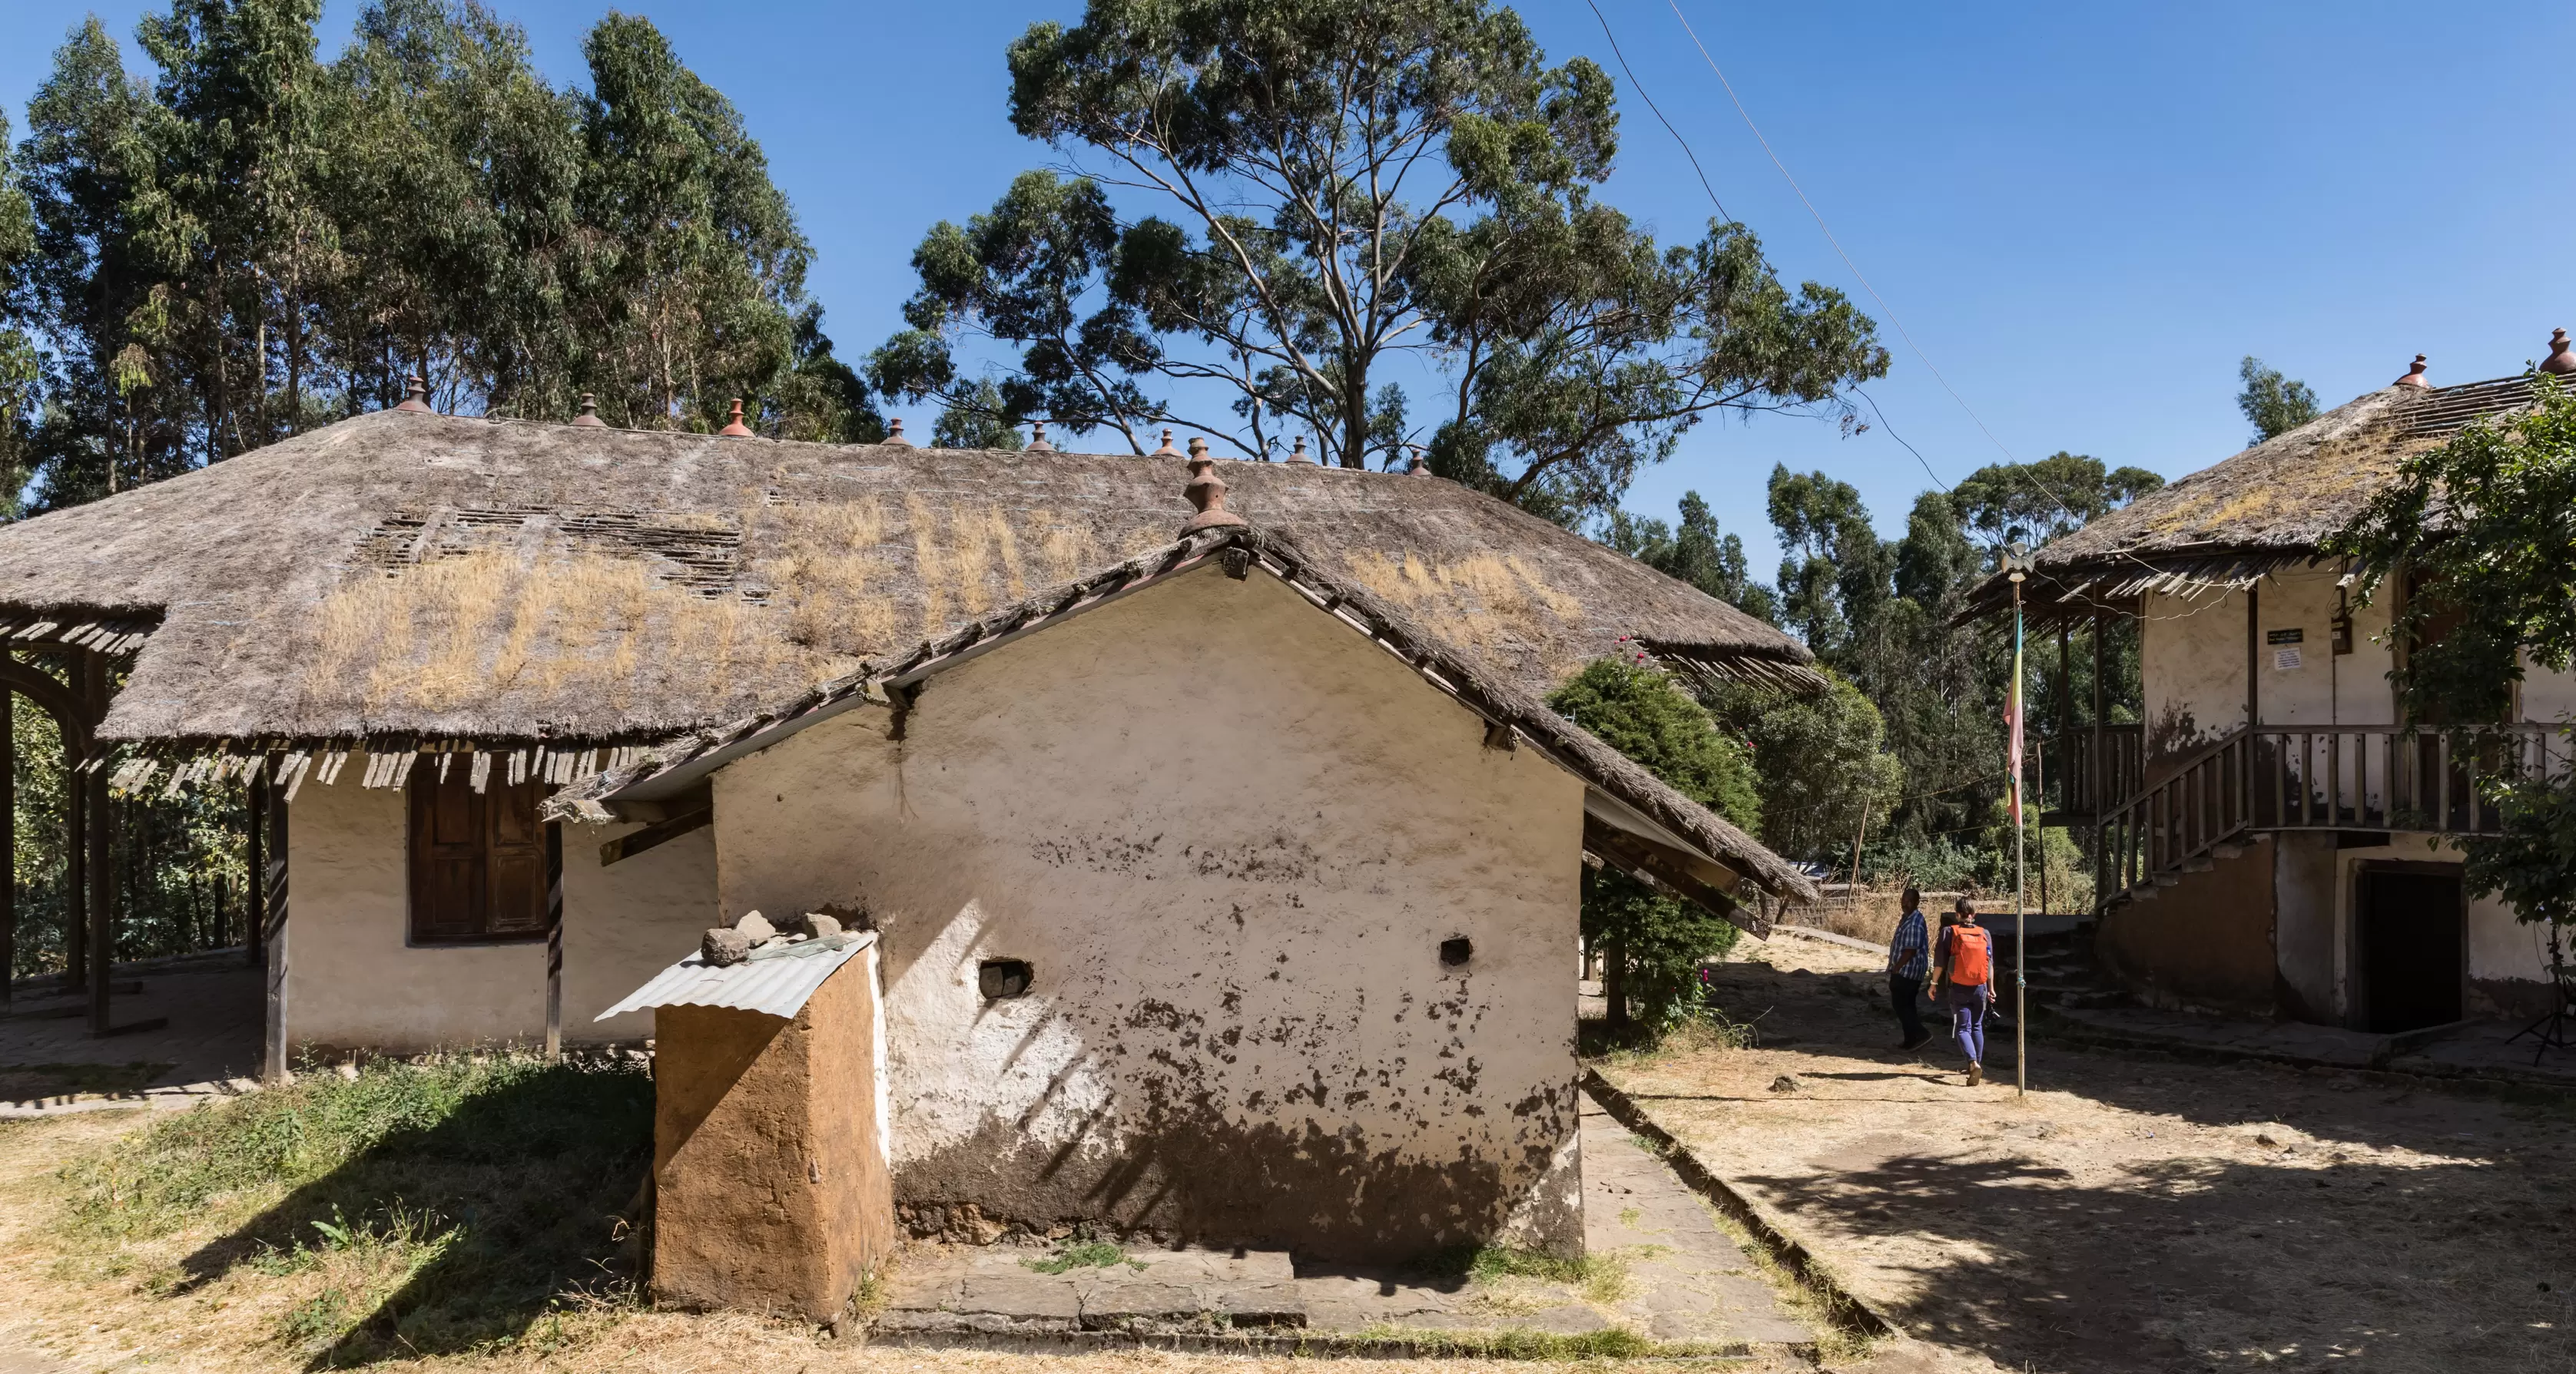 Things to Do in Addis Ababa includes visiting the palace on Mount Entoto